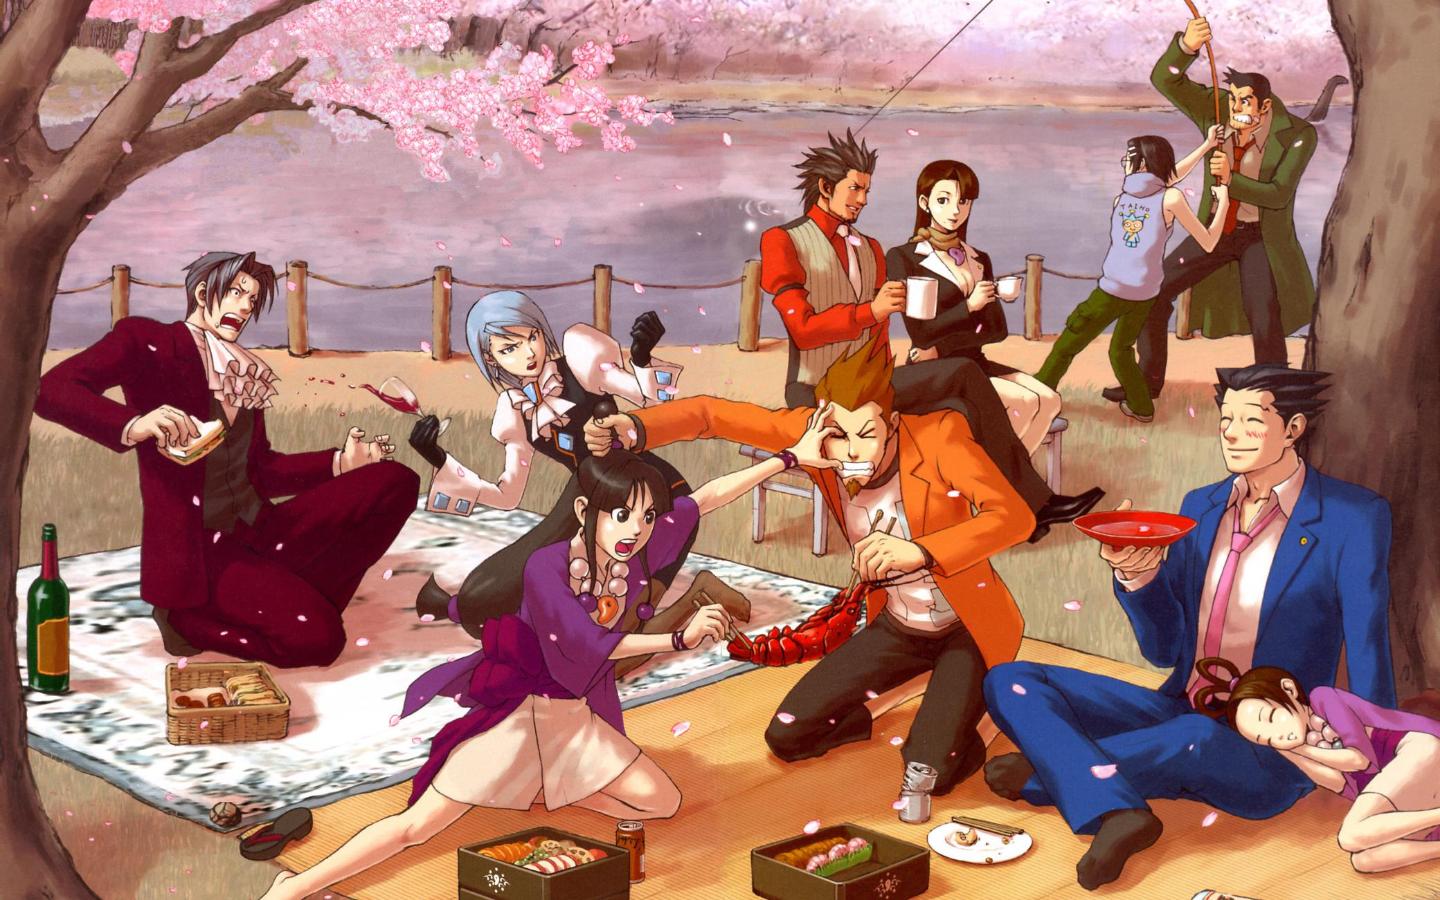 A group of people are having a picnic by a body of water underneath a coupling of cherry blossom trees. One pair is fighting over a lobster with chopsticks while another pair looks on in bewilderment, accidentally tossing wine. Another pair tightly tugs onto a fishing pole from the water.